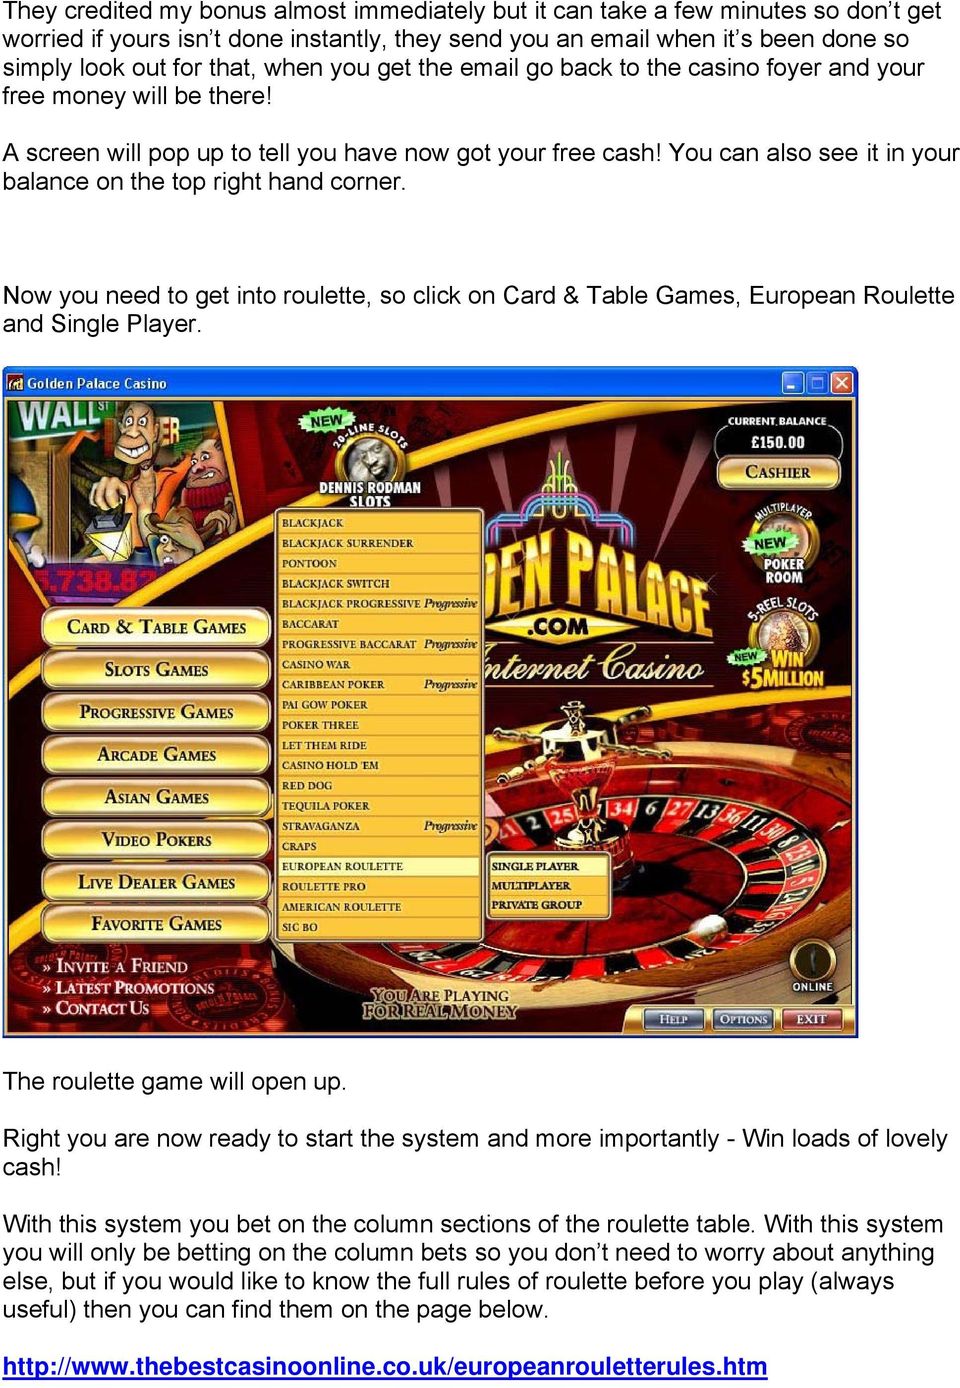 You can also see it in your balance on the top right hand corner. Now you need to get into roulette, so click on Card & Table Games, European Roulette and Single Player.